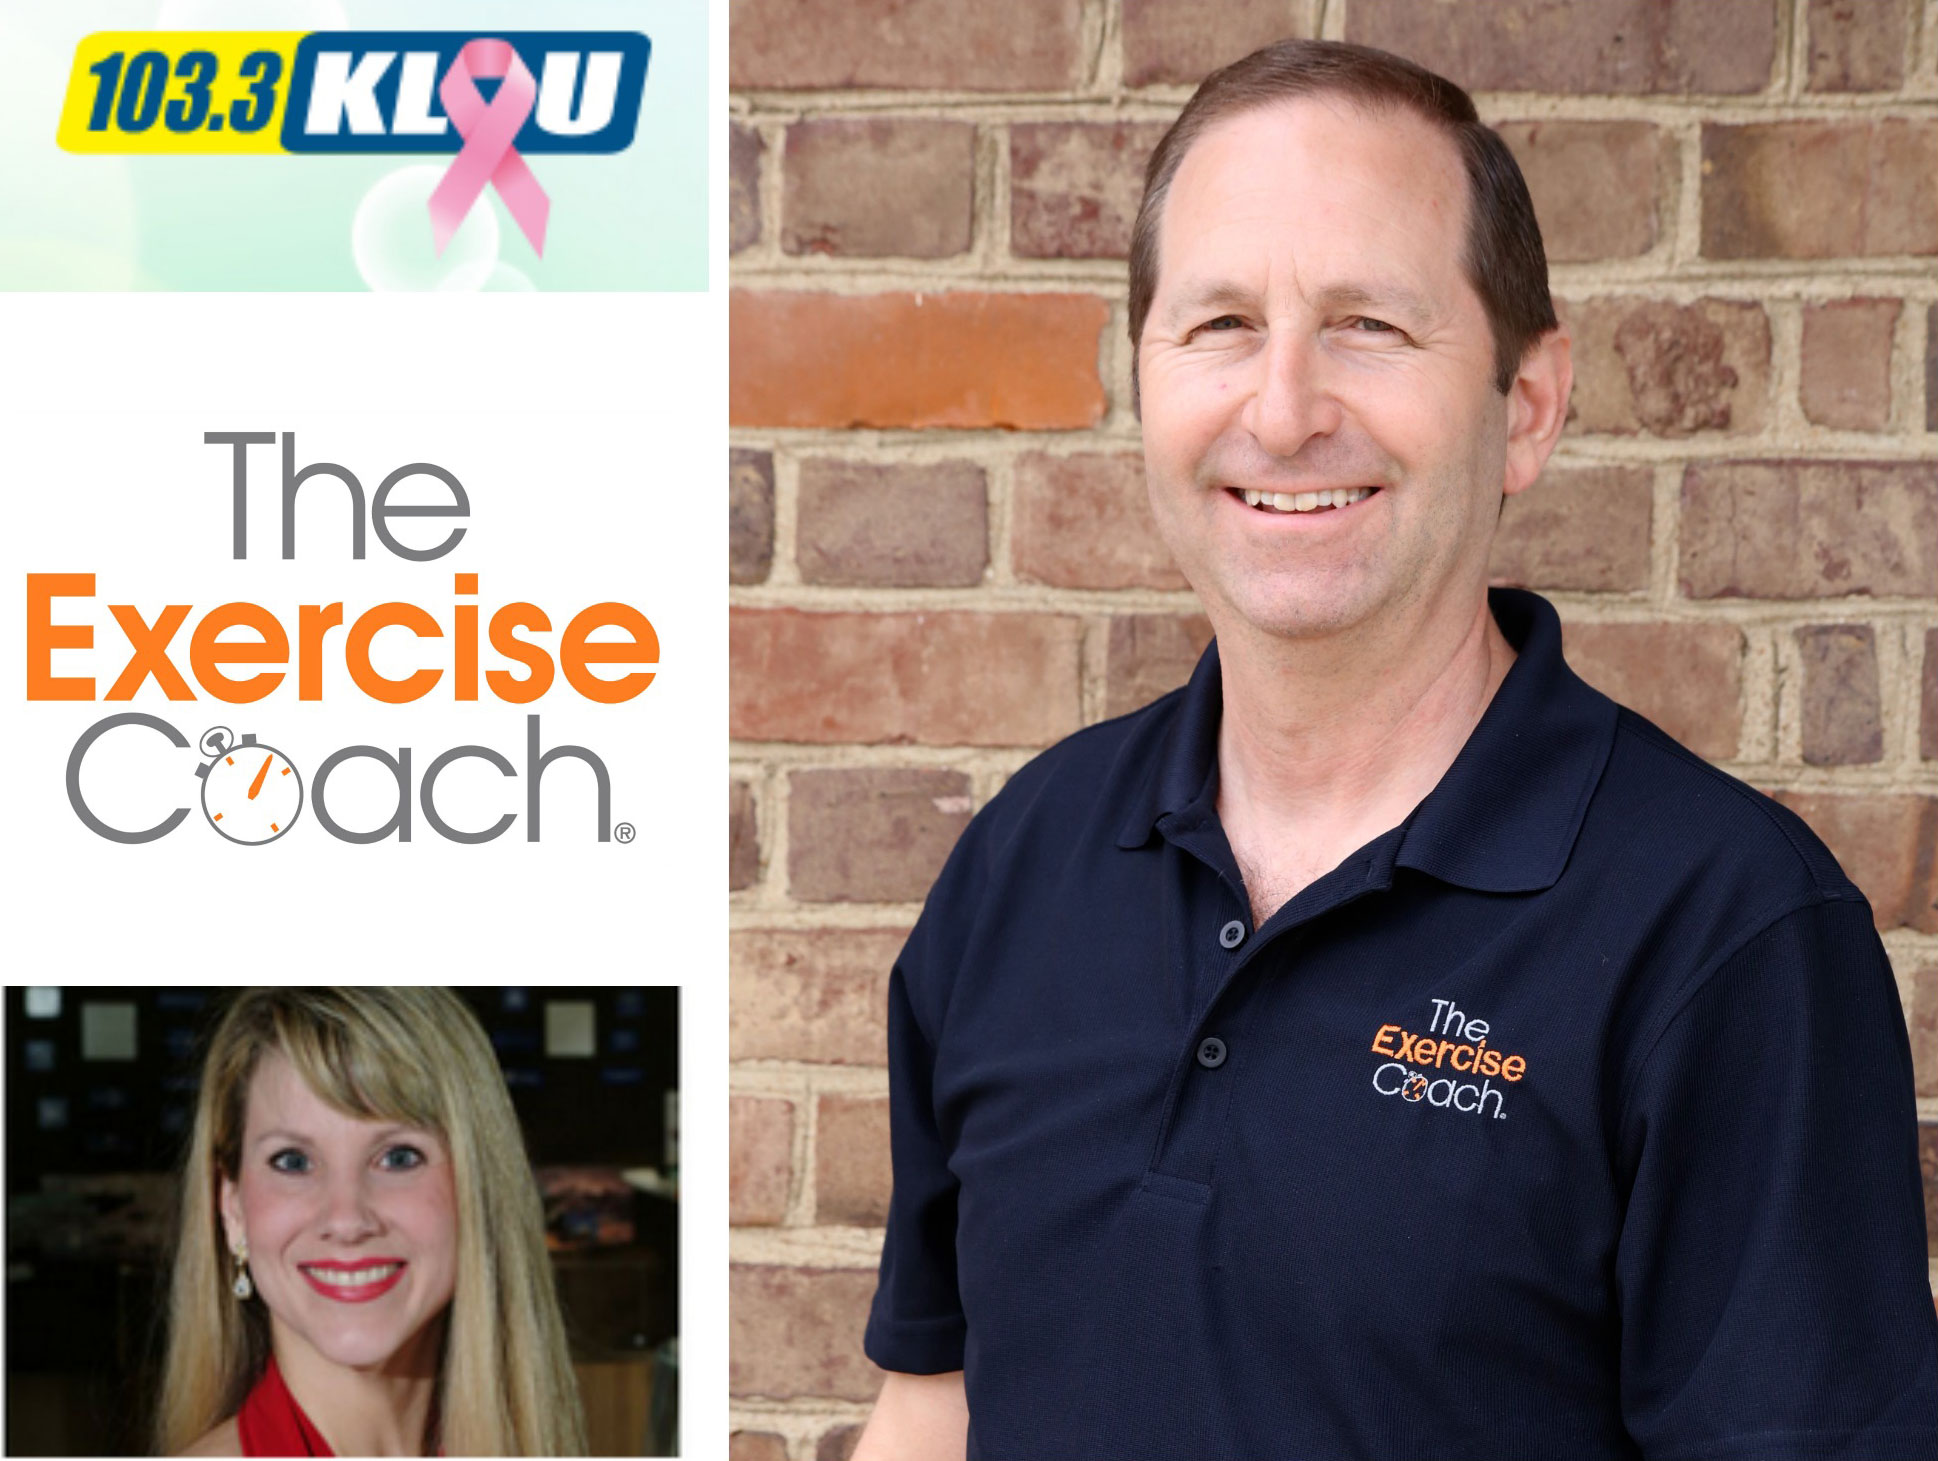 KLOU-FM Business Radio: Don Eisenberg Opens Several Exercise Coach Studios in St. Louis